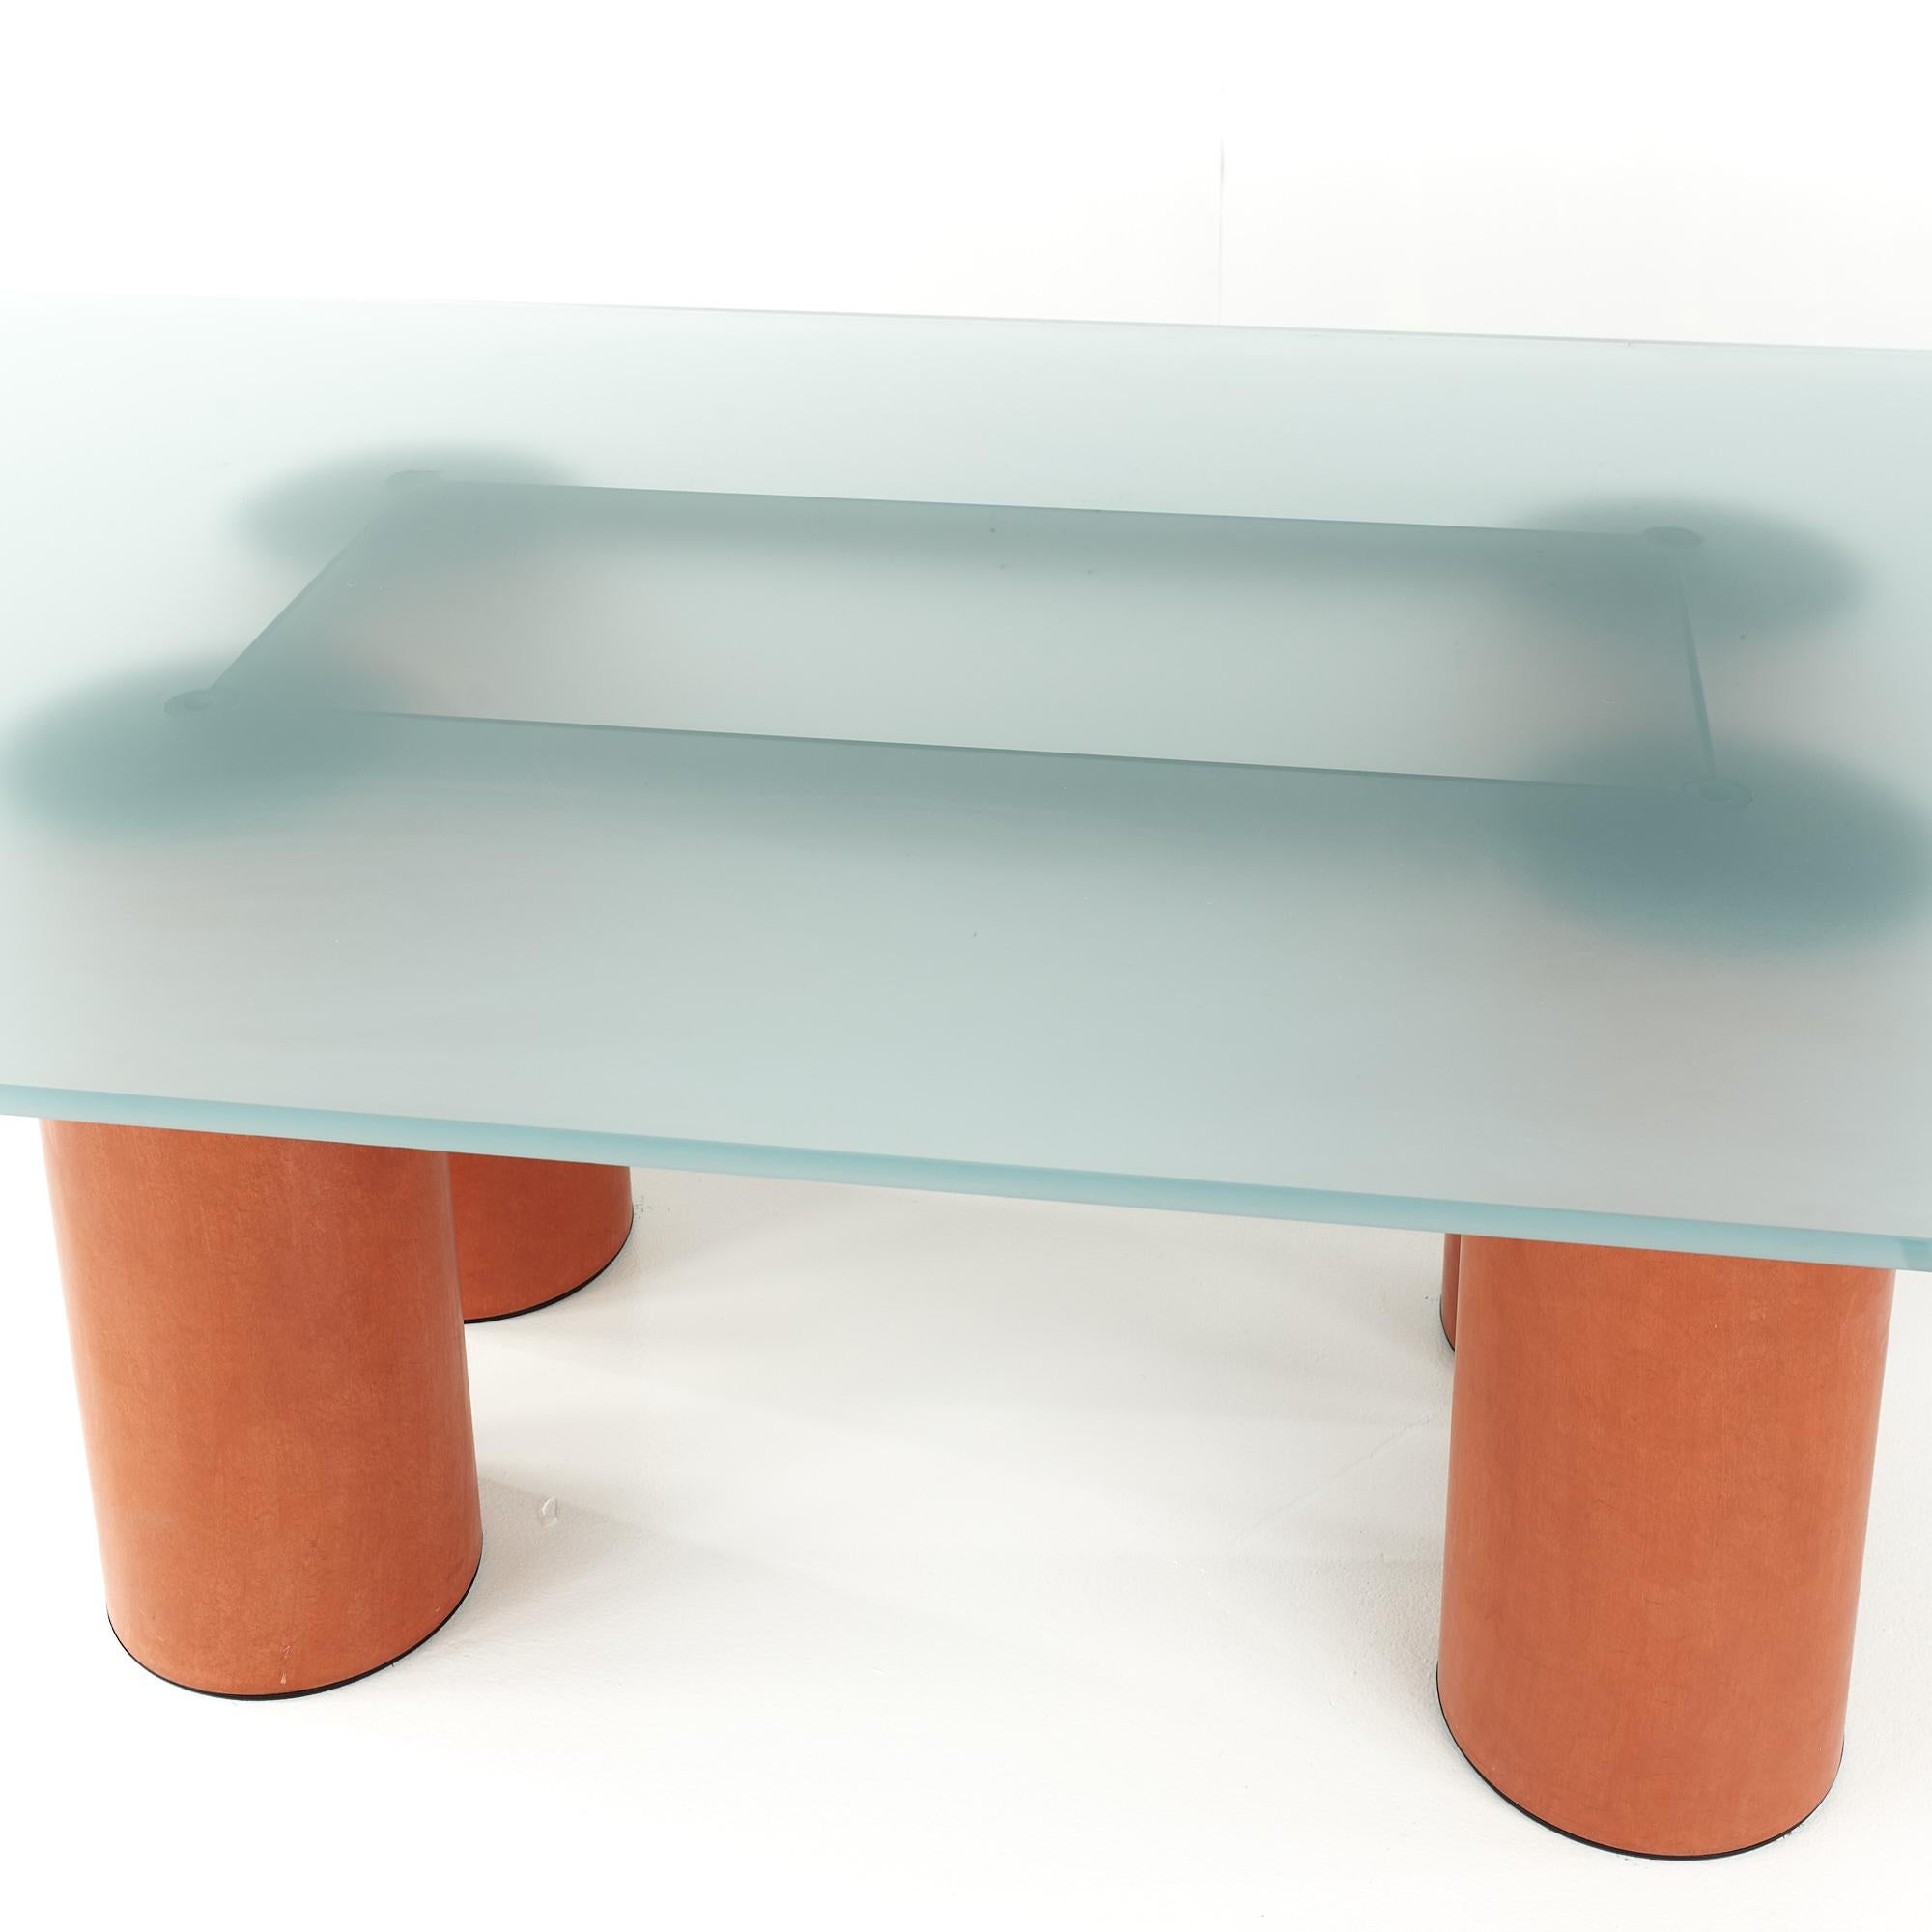 Metal Massimo Vignelli Post Modern Glass Dining Table For Sale